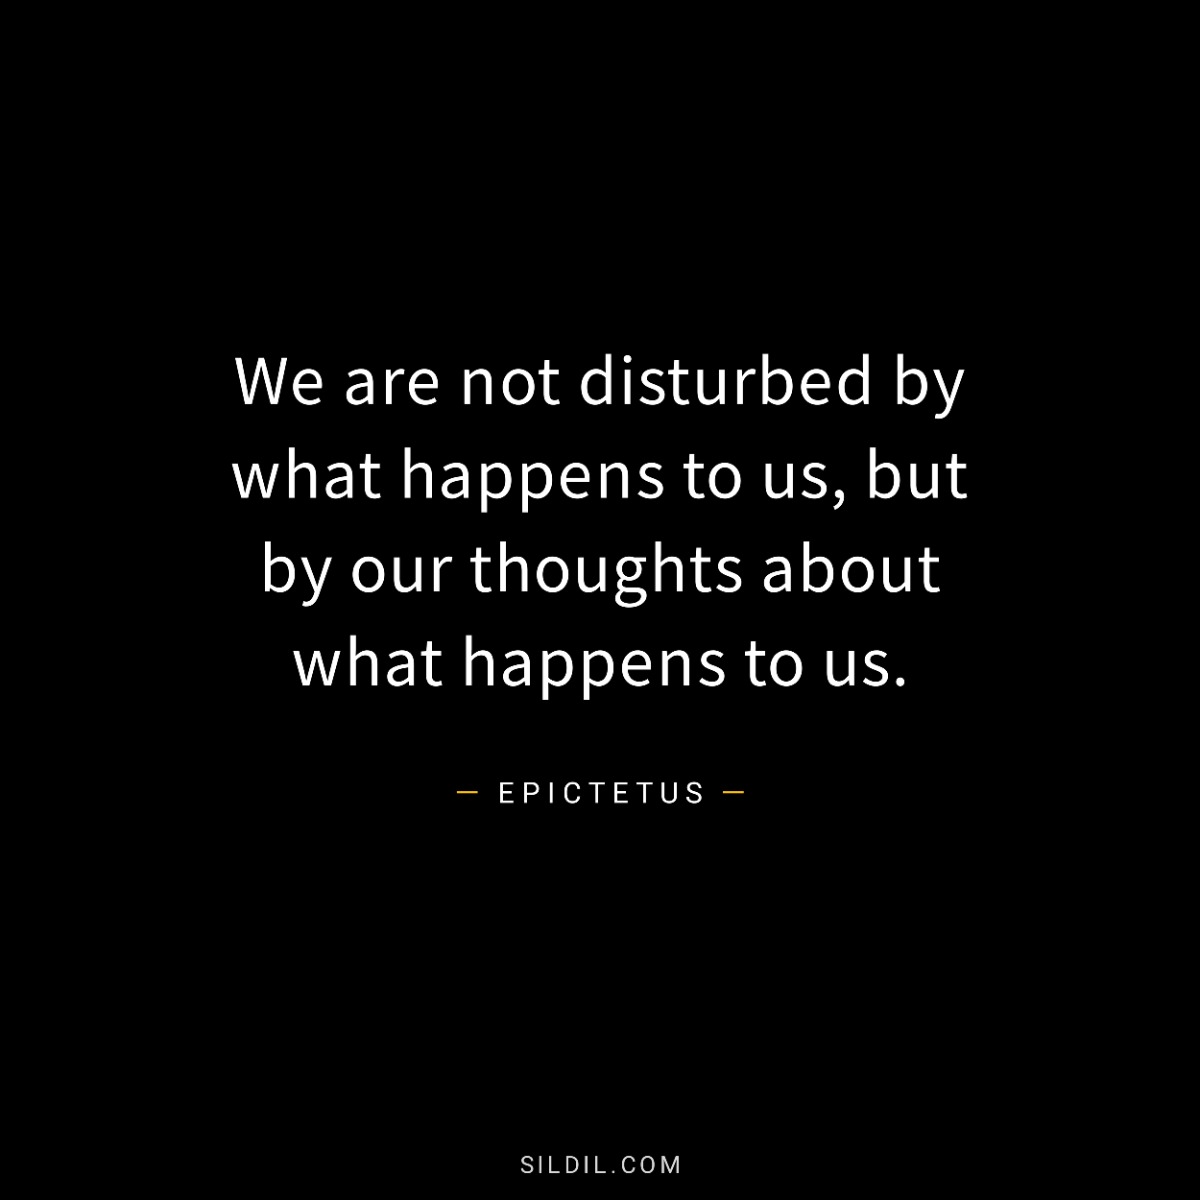 We are not disturbed by what happens to us, but by our thoughts about what happens to us.